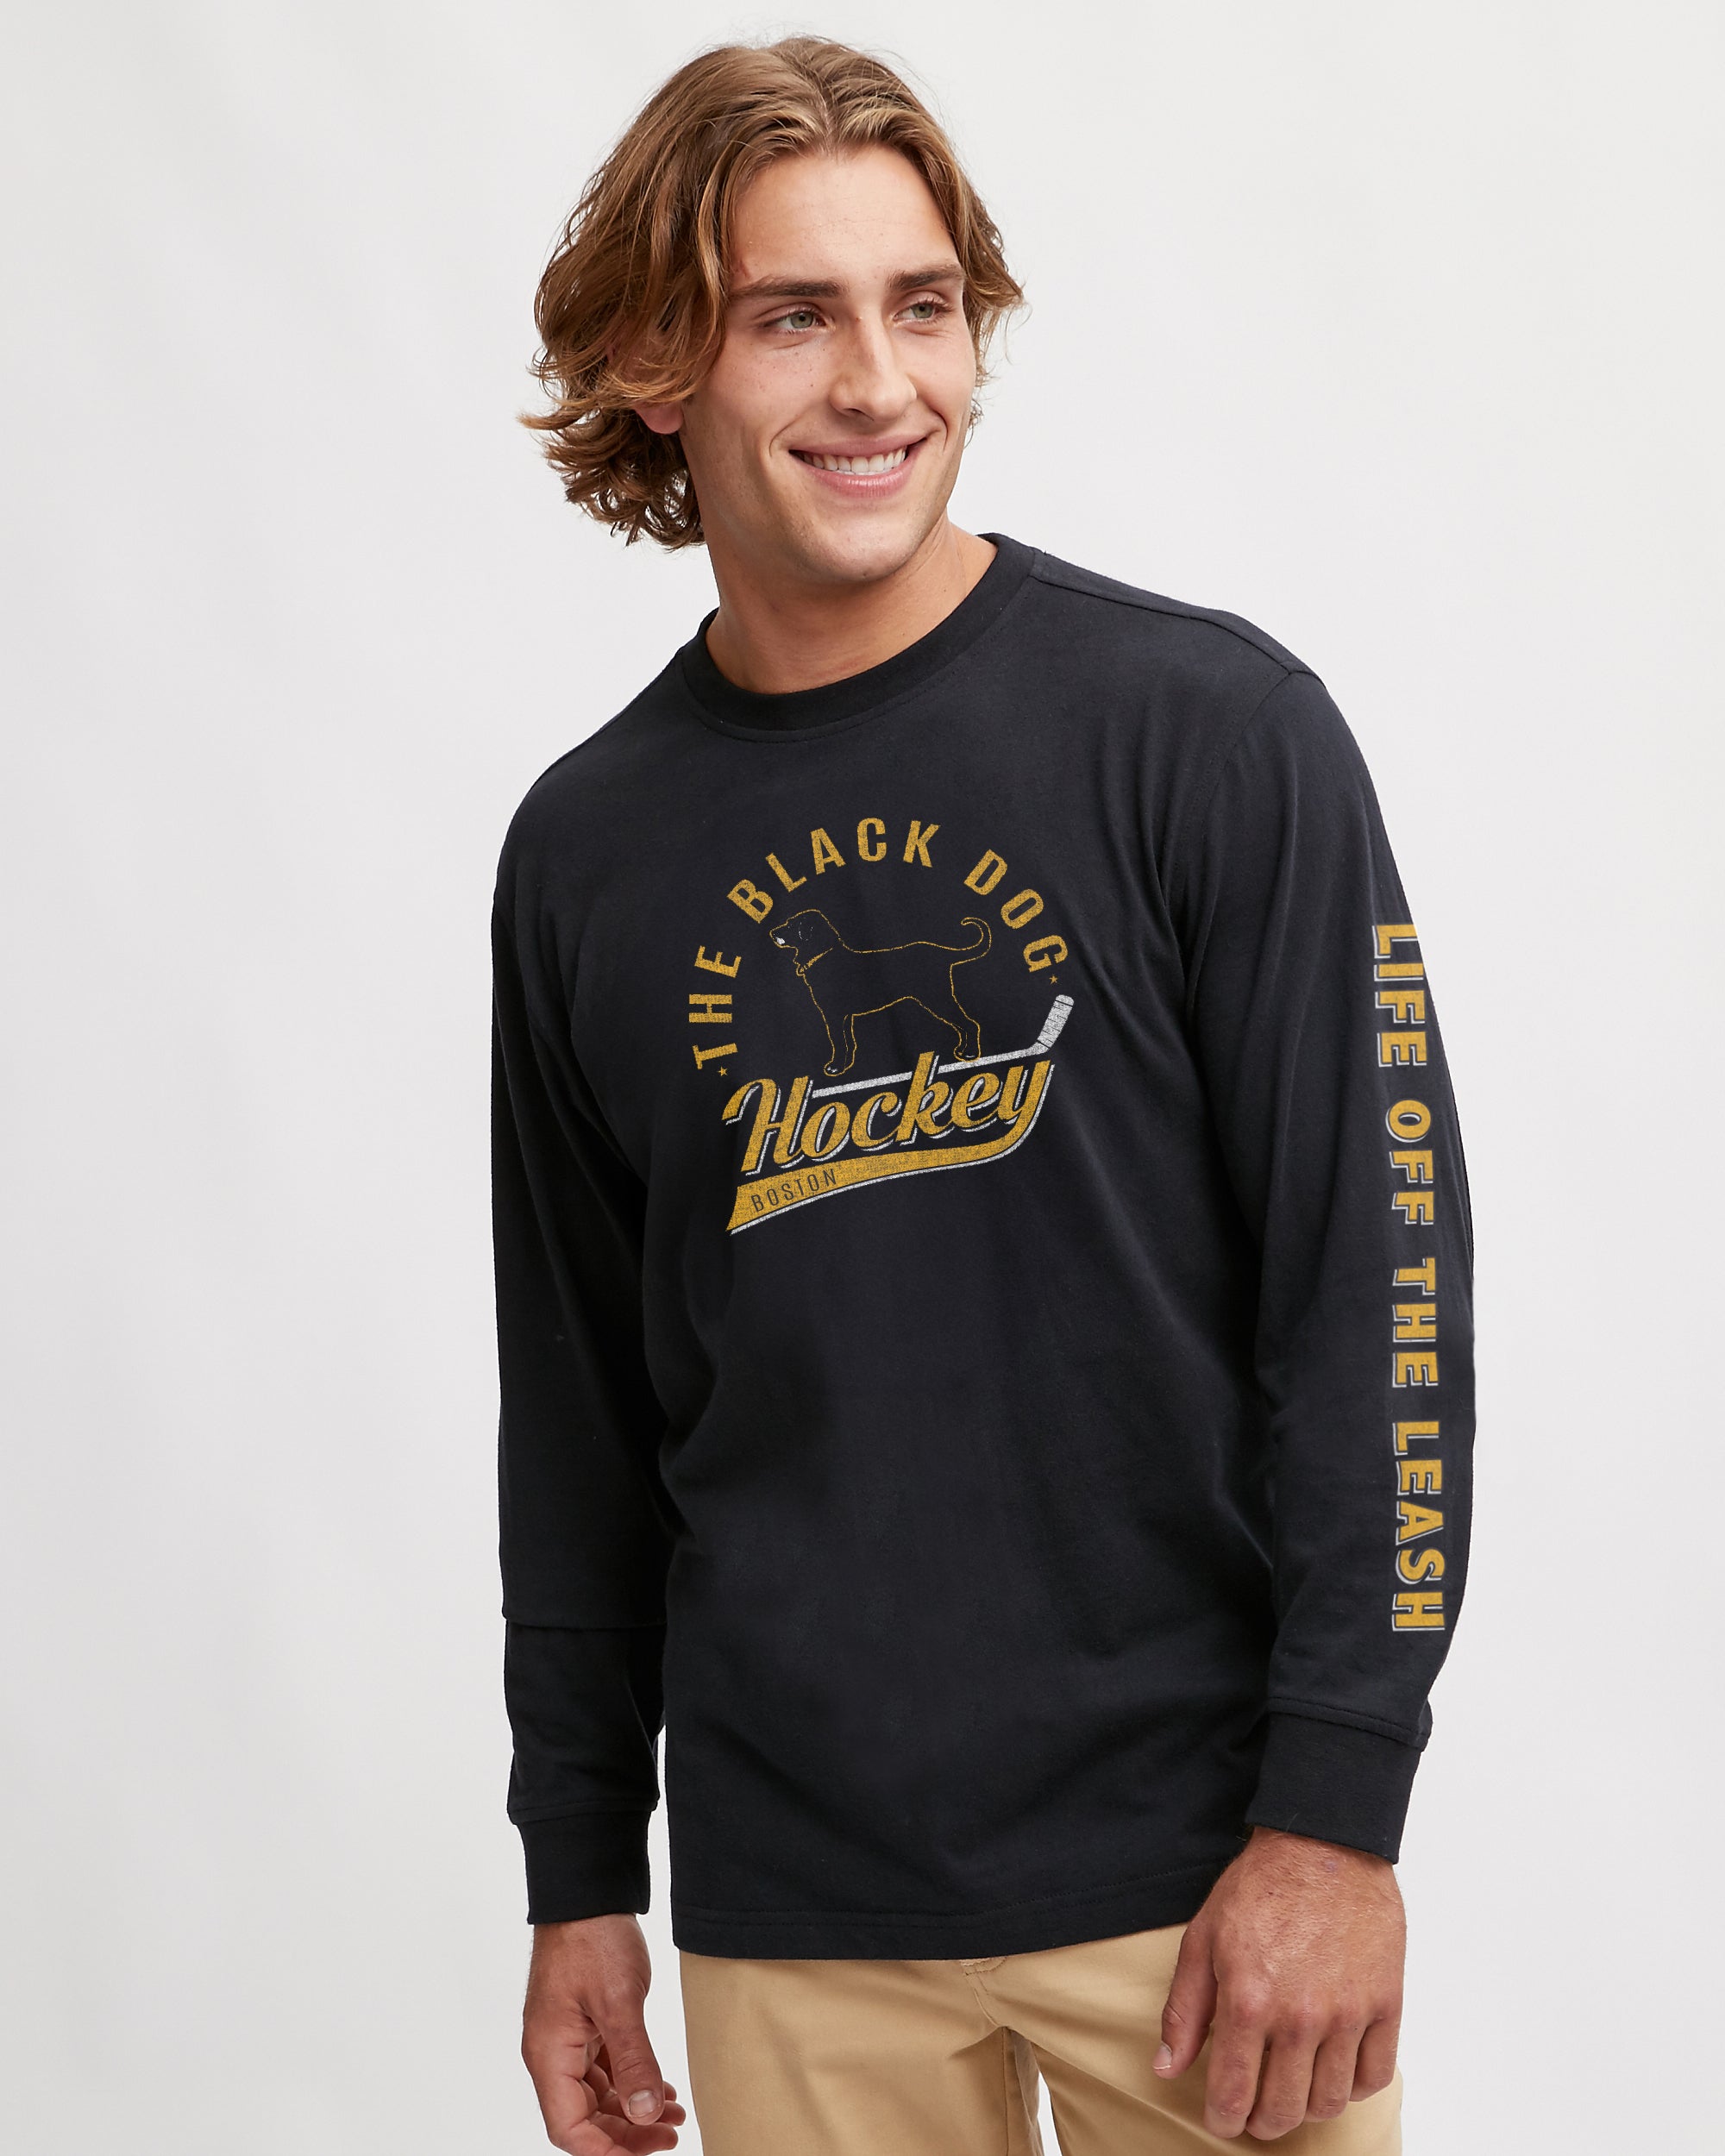 Adult Longsleeve Black And Gold Tee – The Black Dog